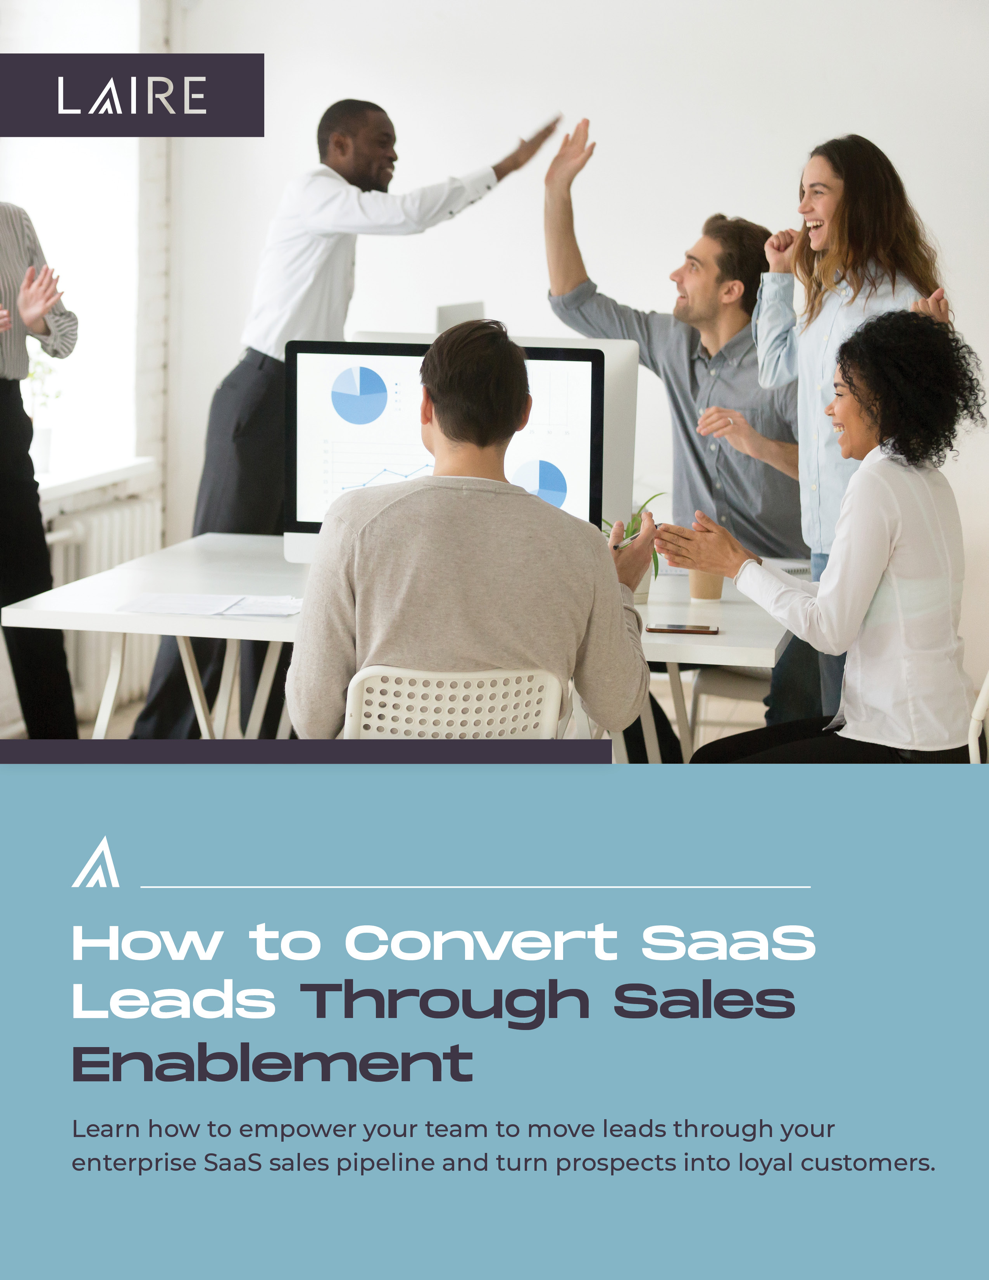 LAIRE_Convert SaaS Leads Sales Enablement-Cover 700px